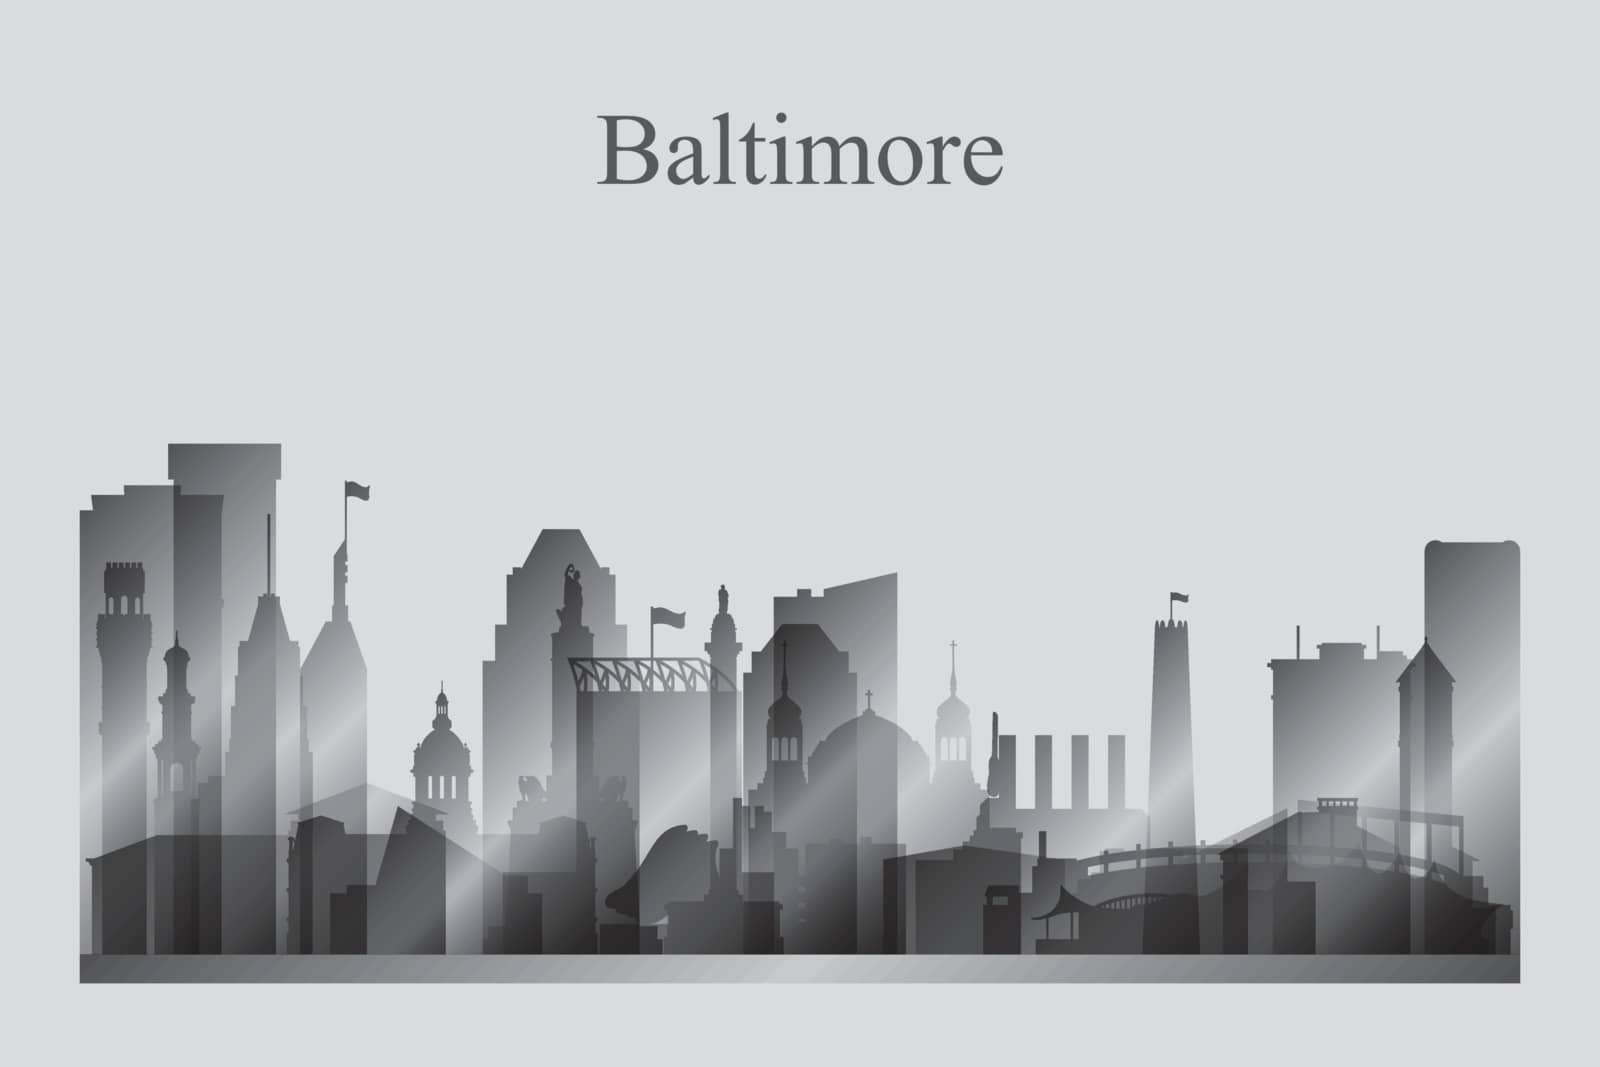 Baltimore city skyline silhouette in grayscale by Ray_of_Light